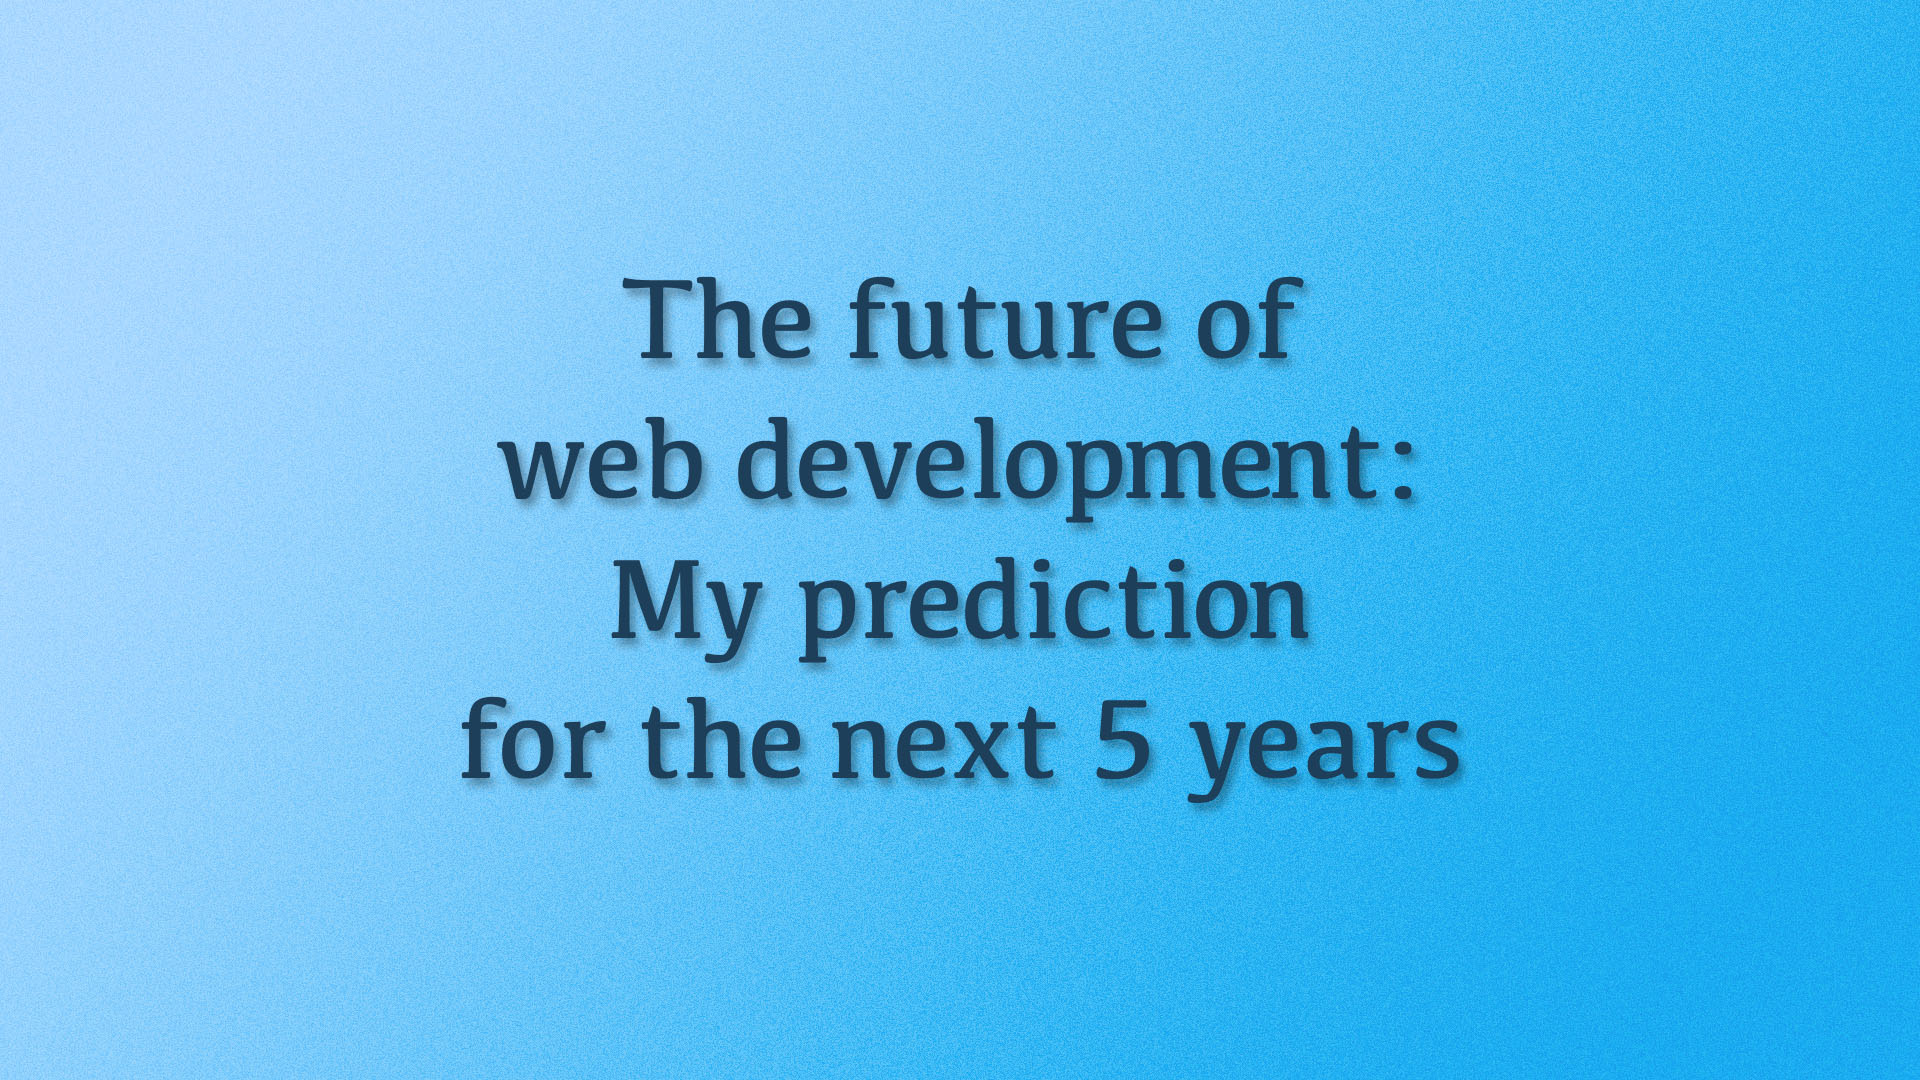 The future of web development: My prediction for the next 5 years